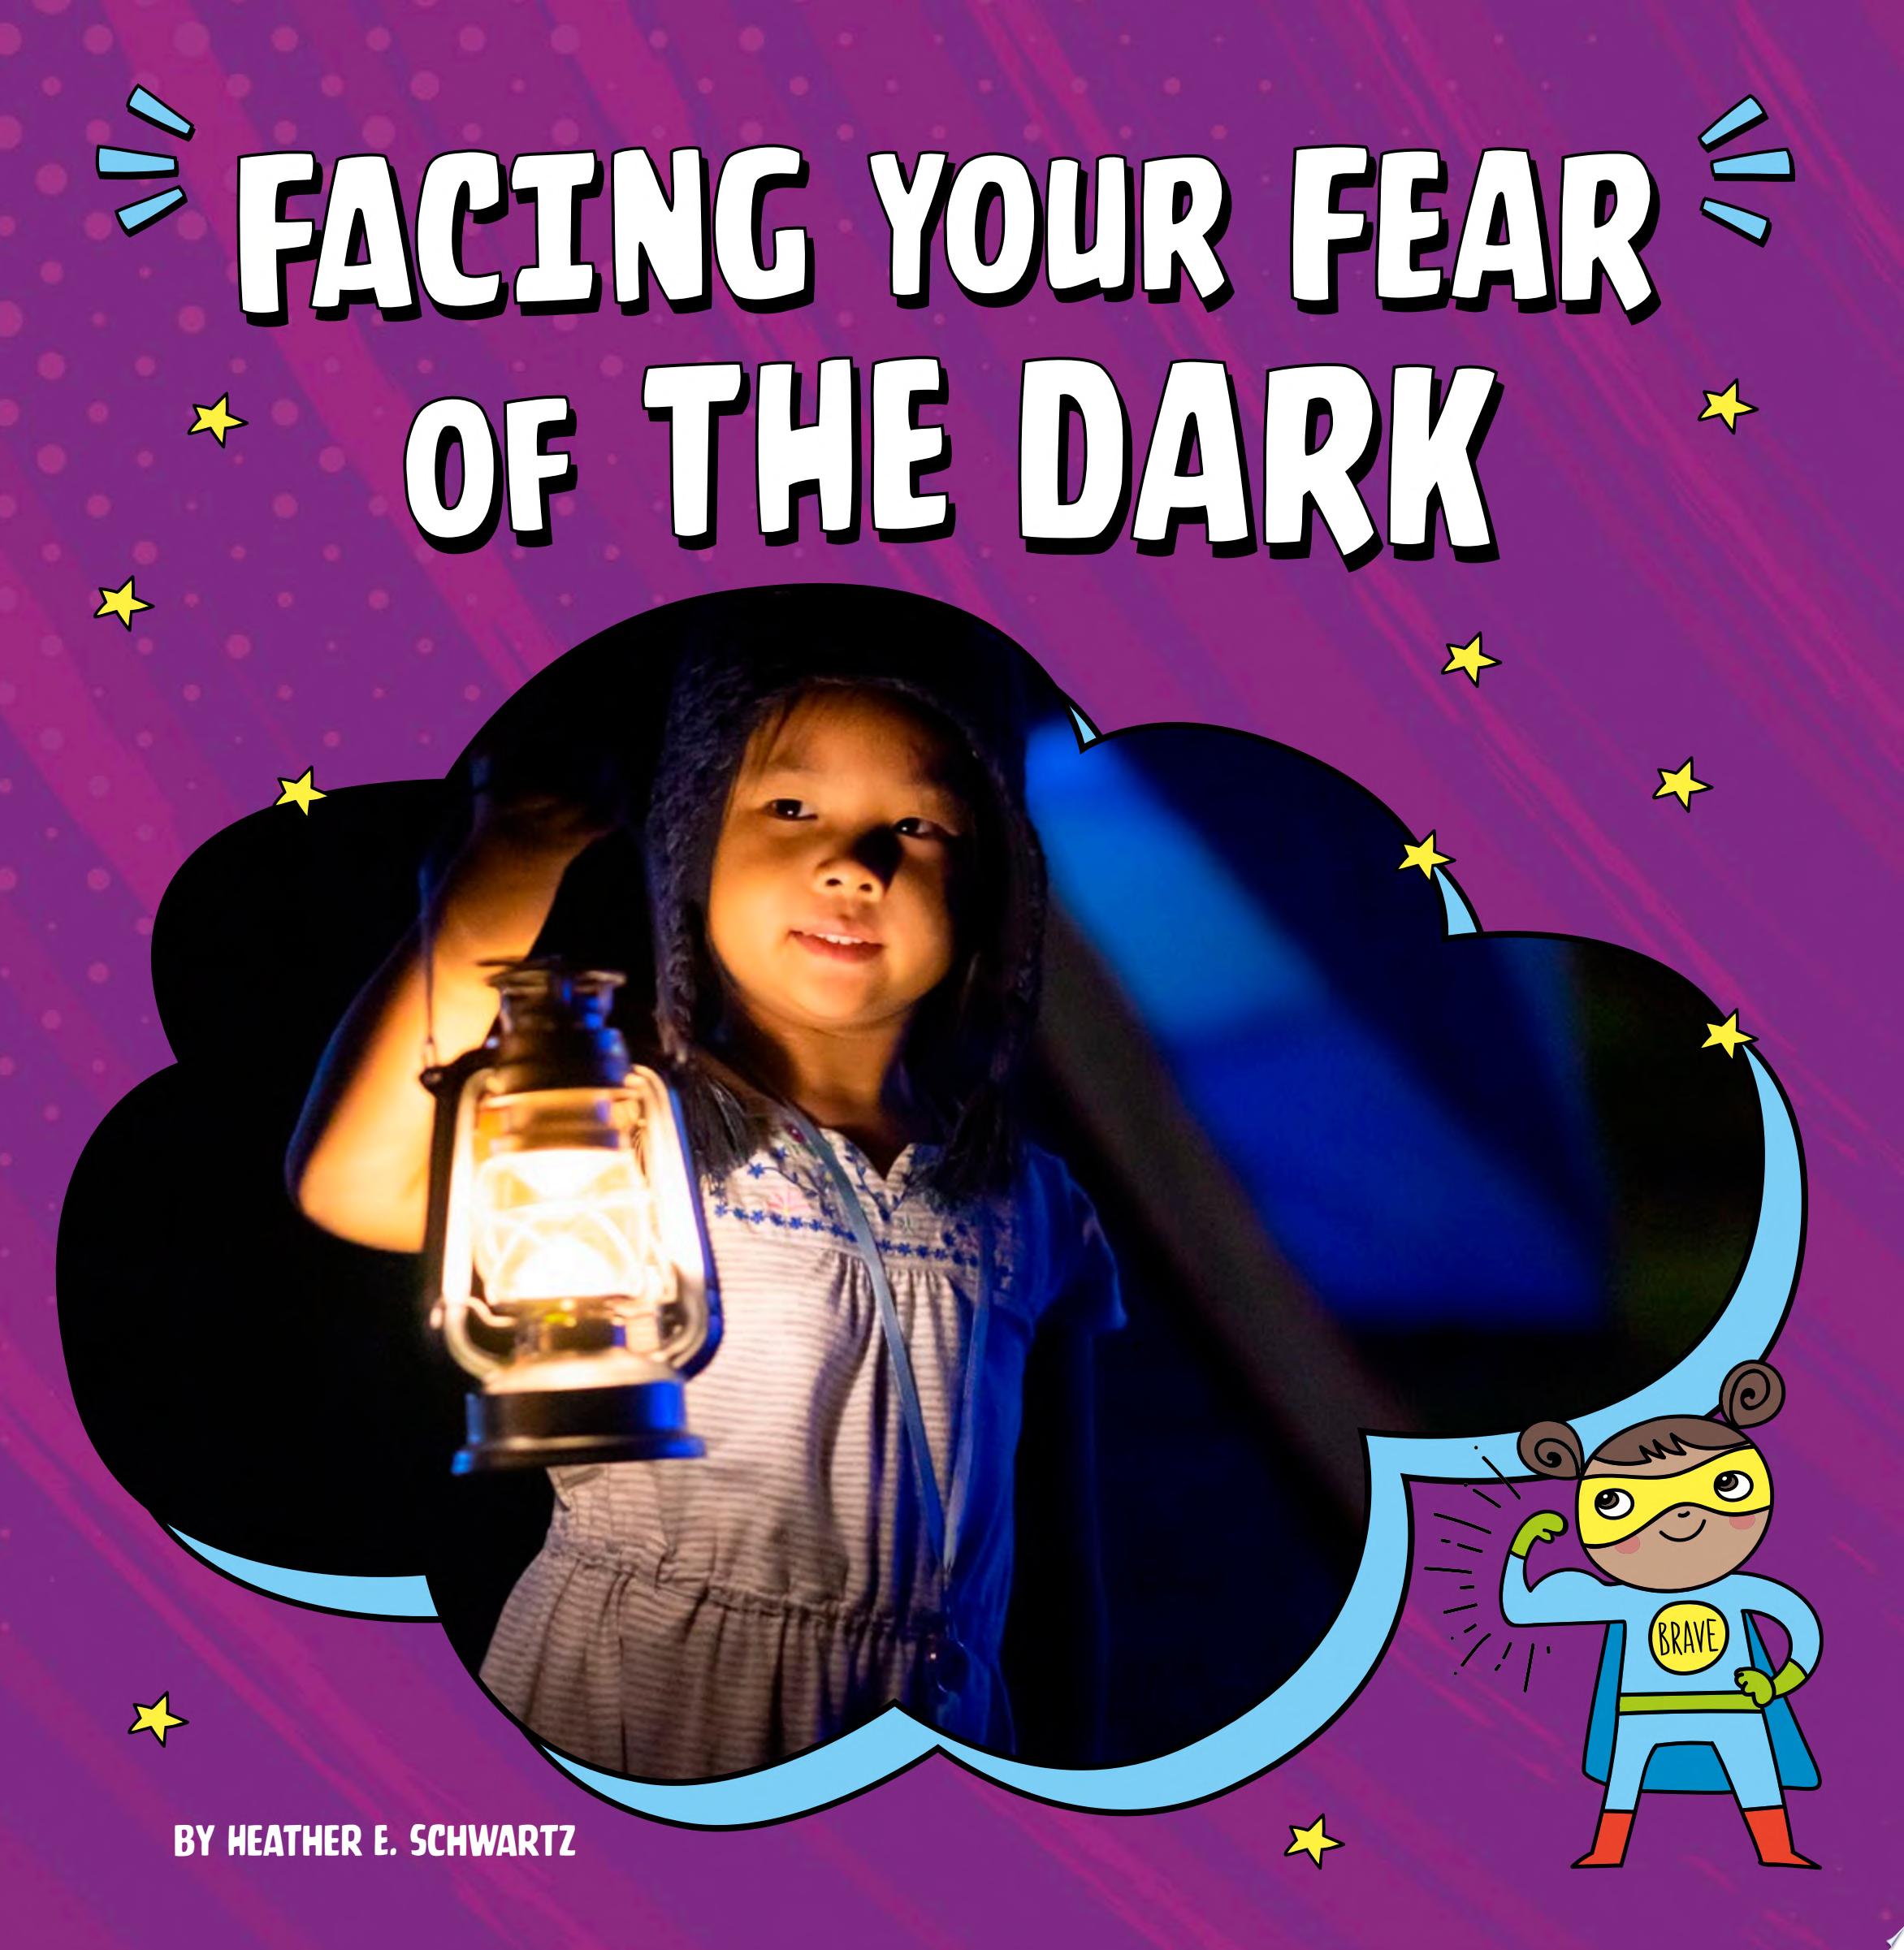 Image for "Facing Your Fear of the Dark"